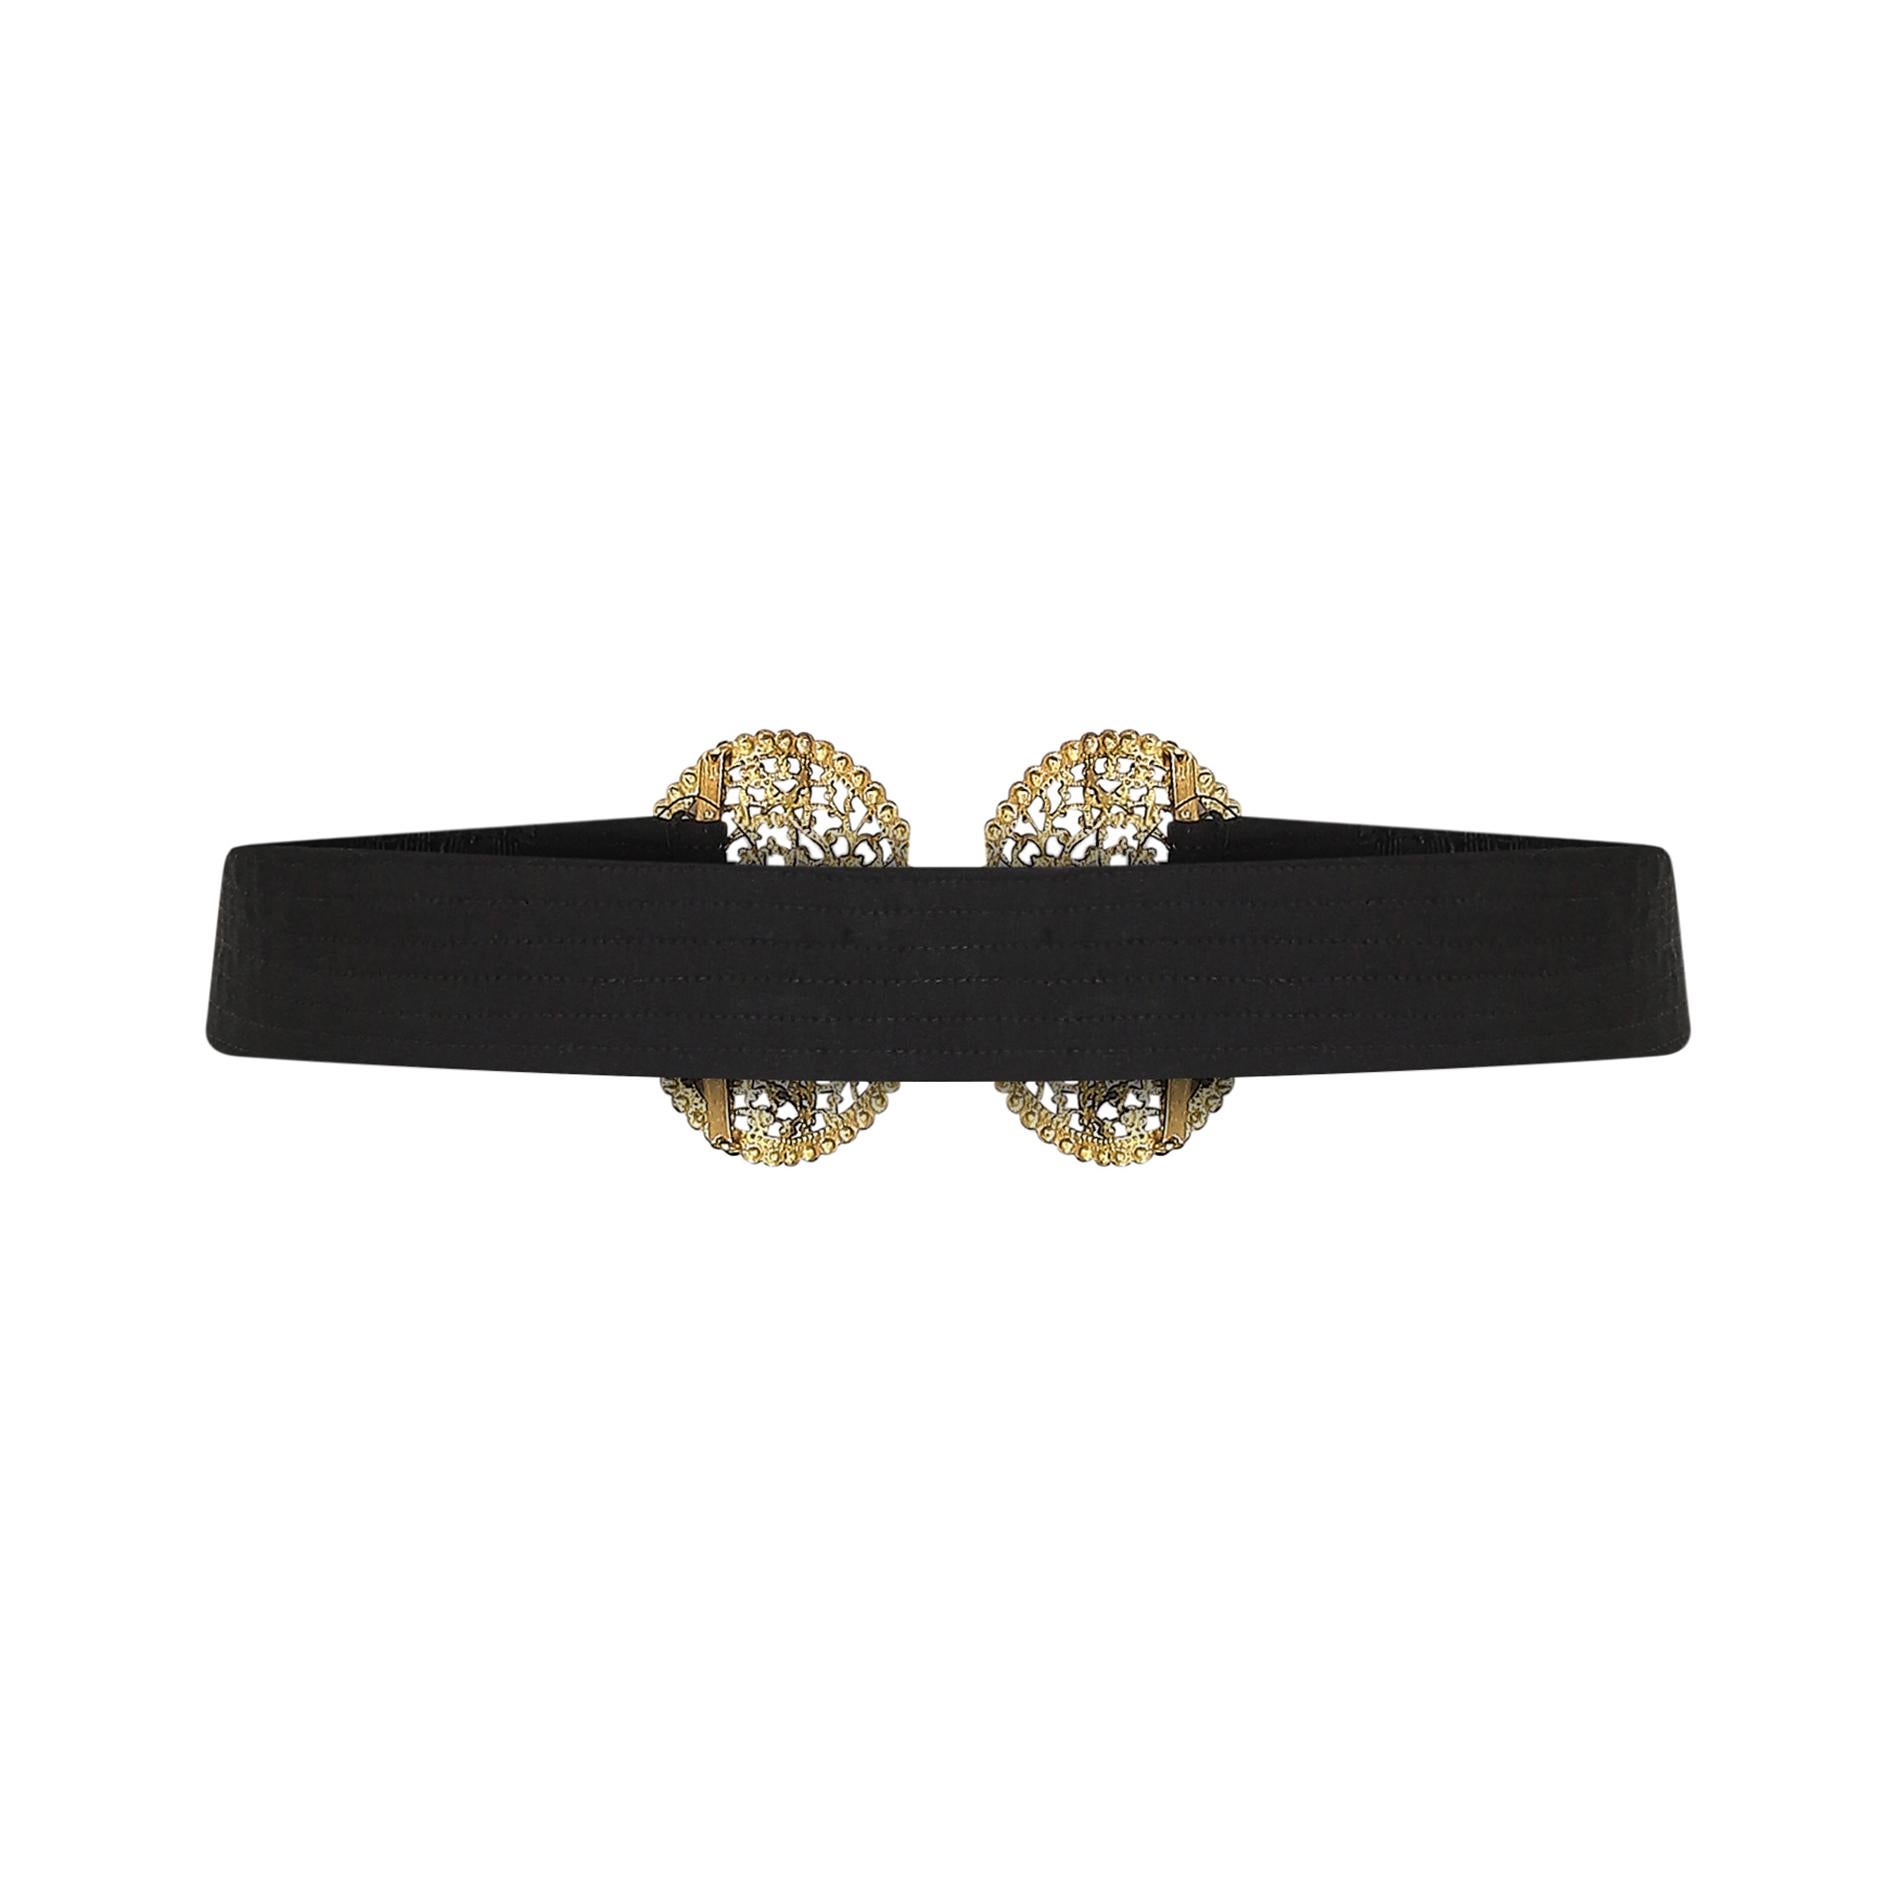 1920s French Filigree Buckle and Black Fabric Belt In Excellent Condition For Sale In London, GB